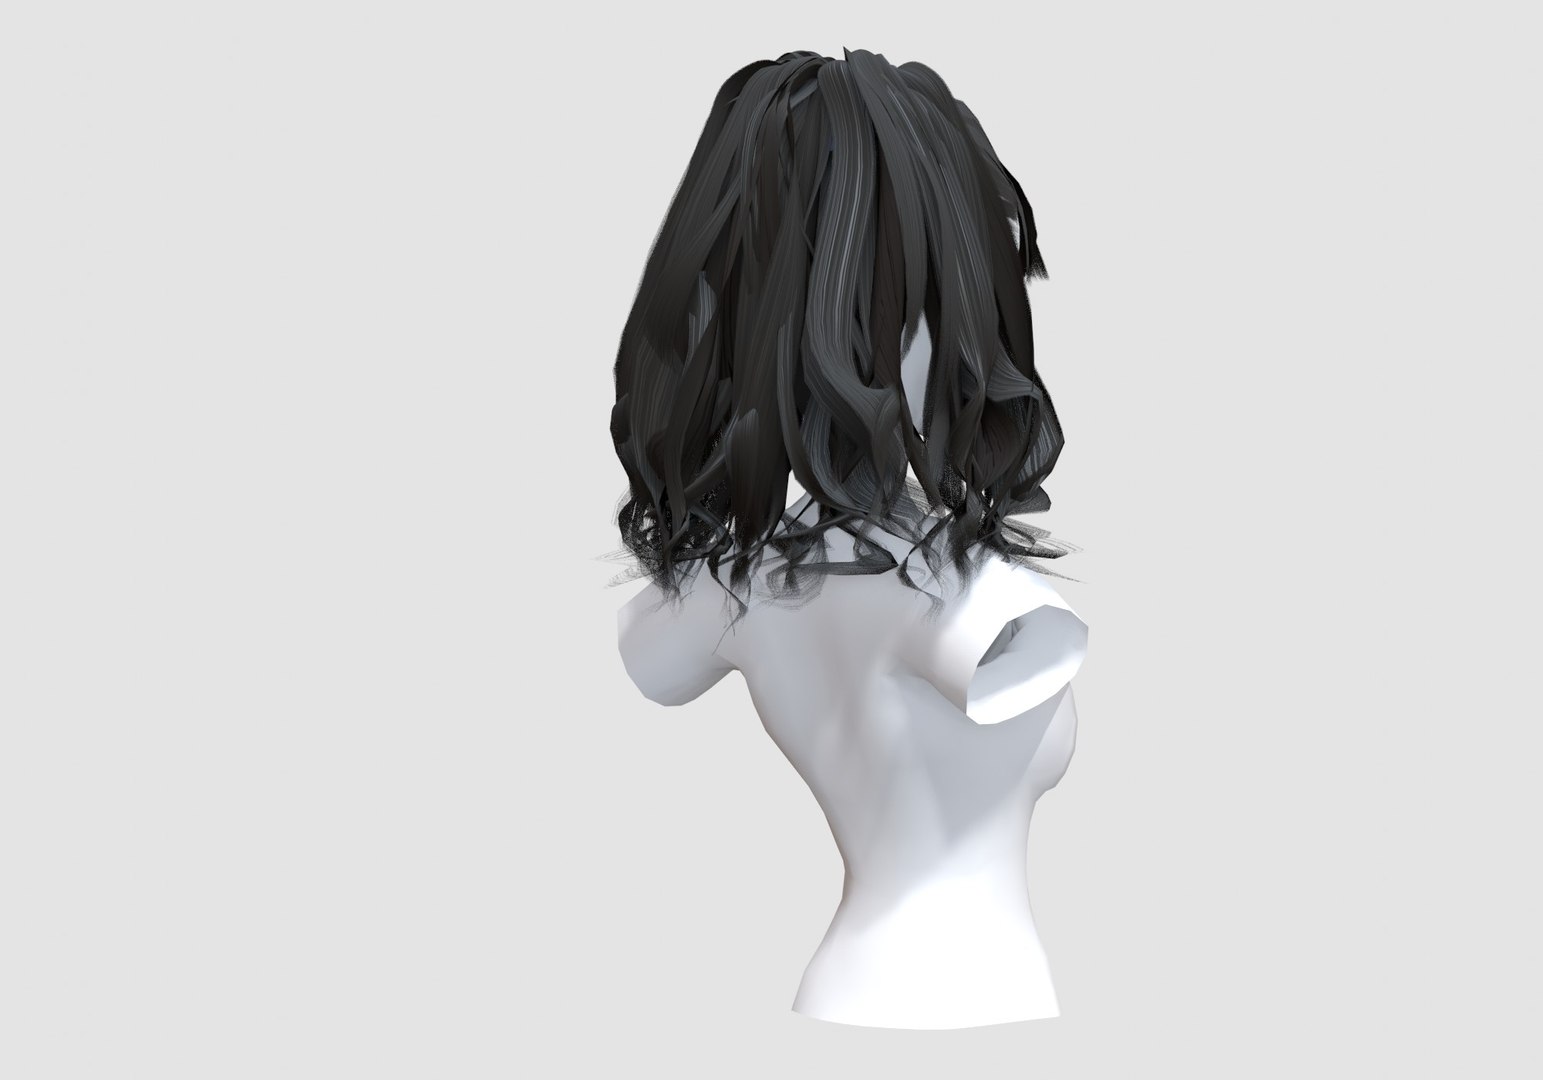 Thick Bangs Hairstyle - 3D Model by nickianimations